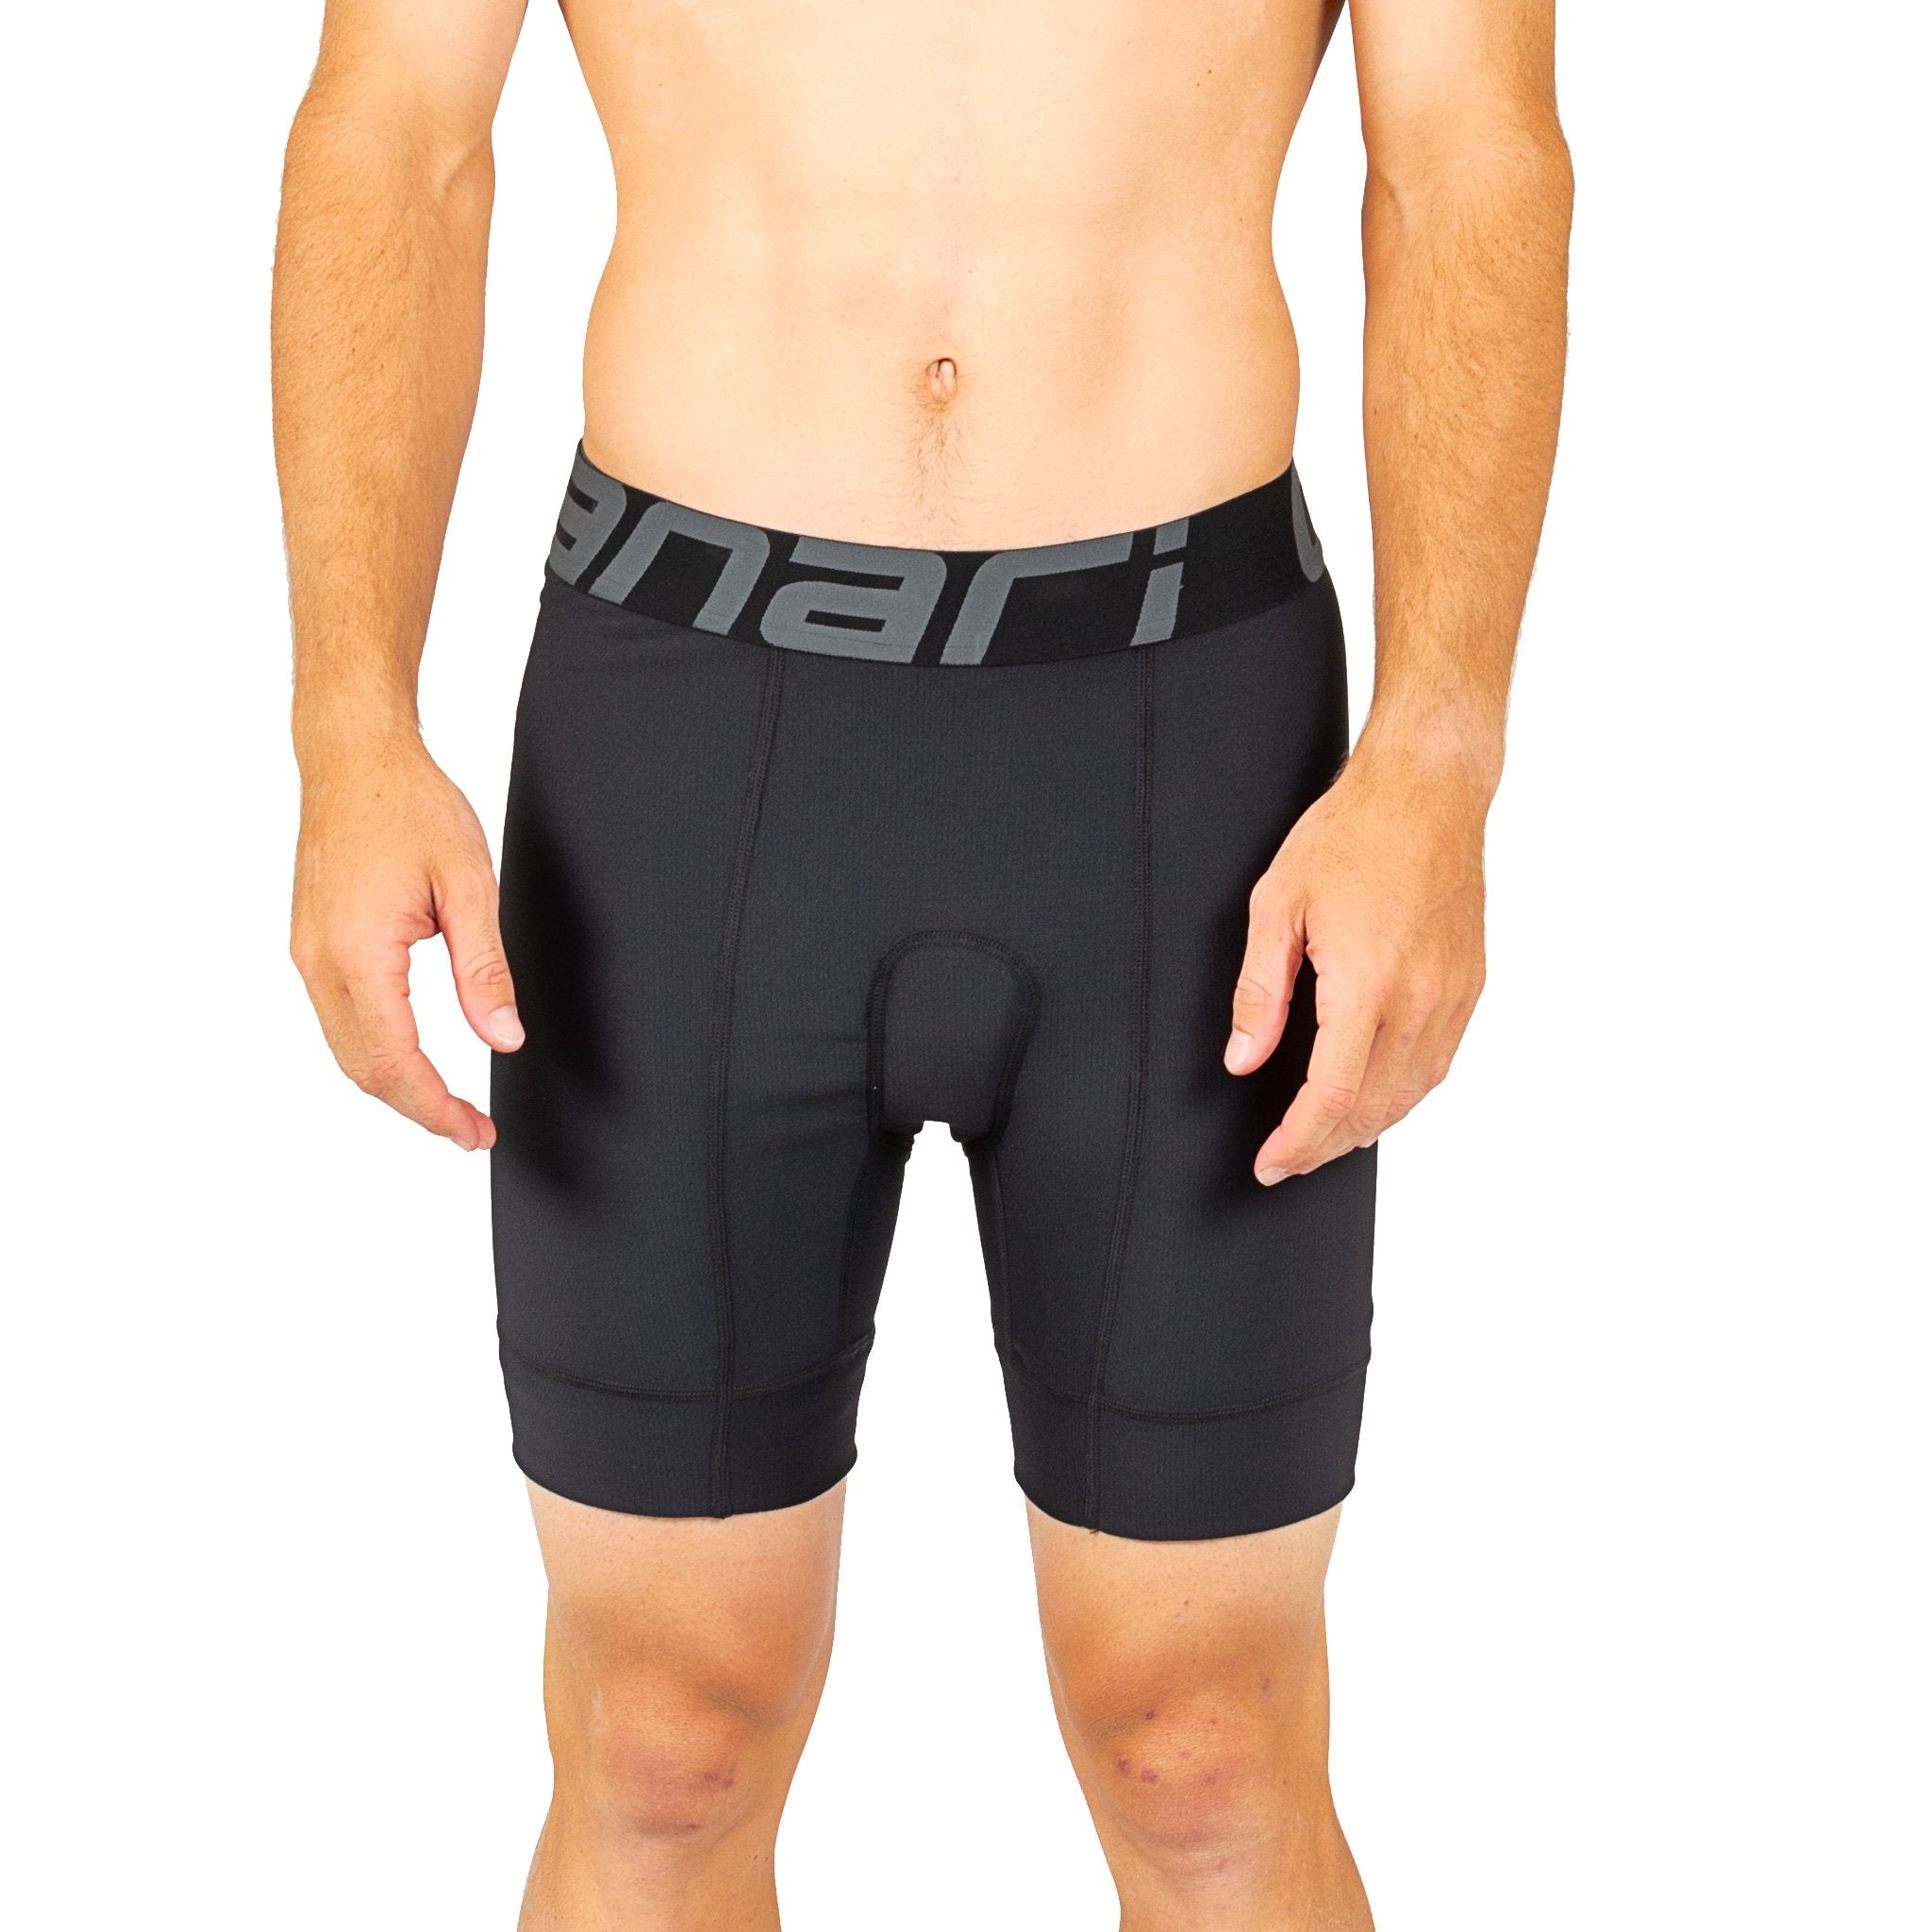 Men's Spiral Padded Cycling Tight